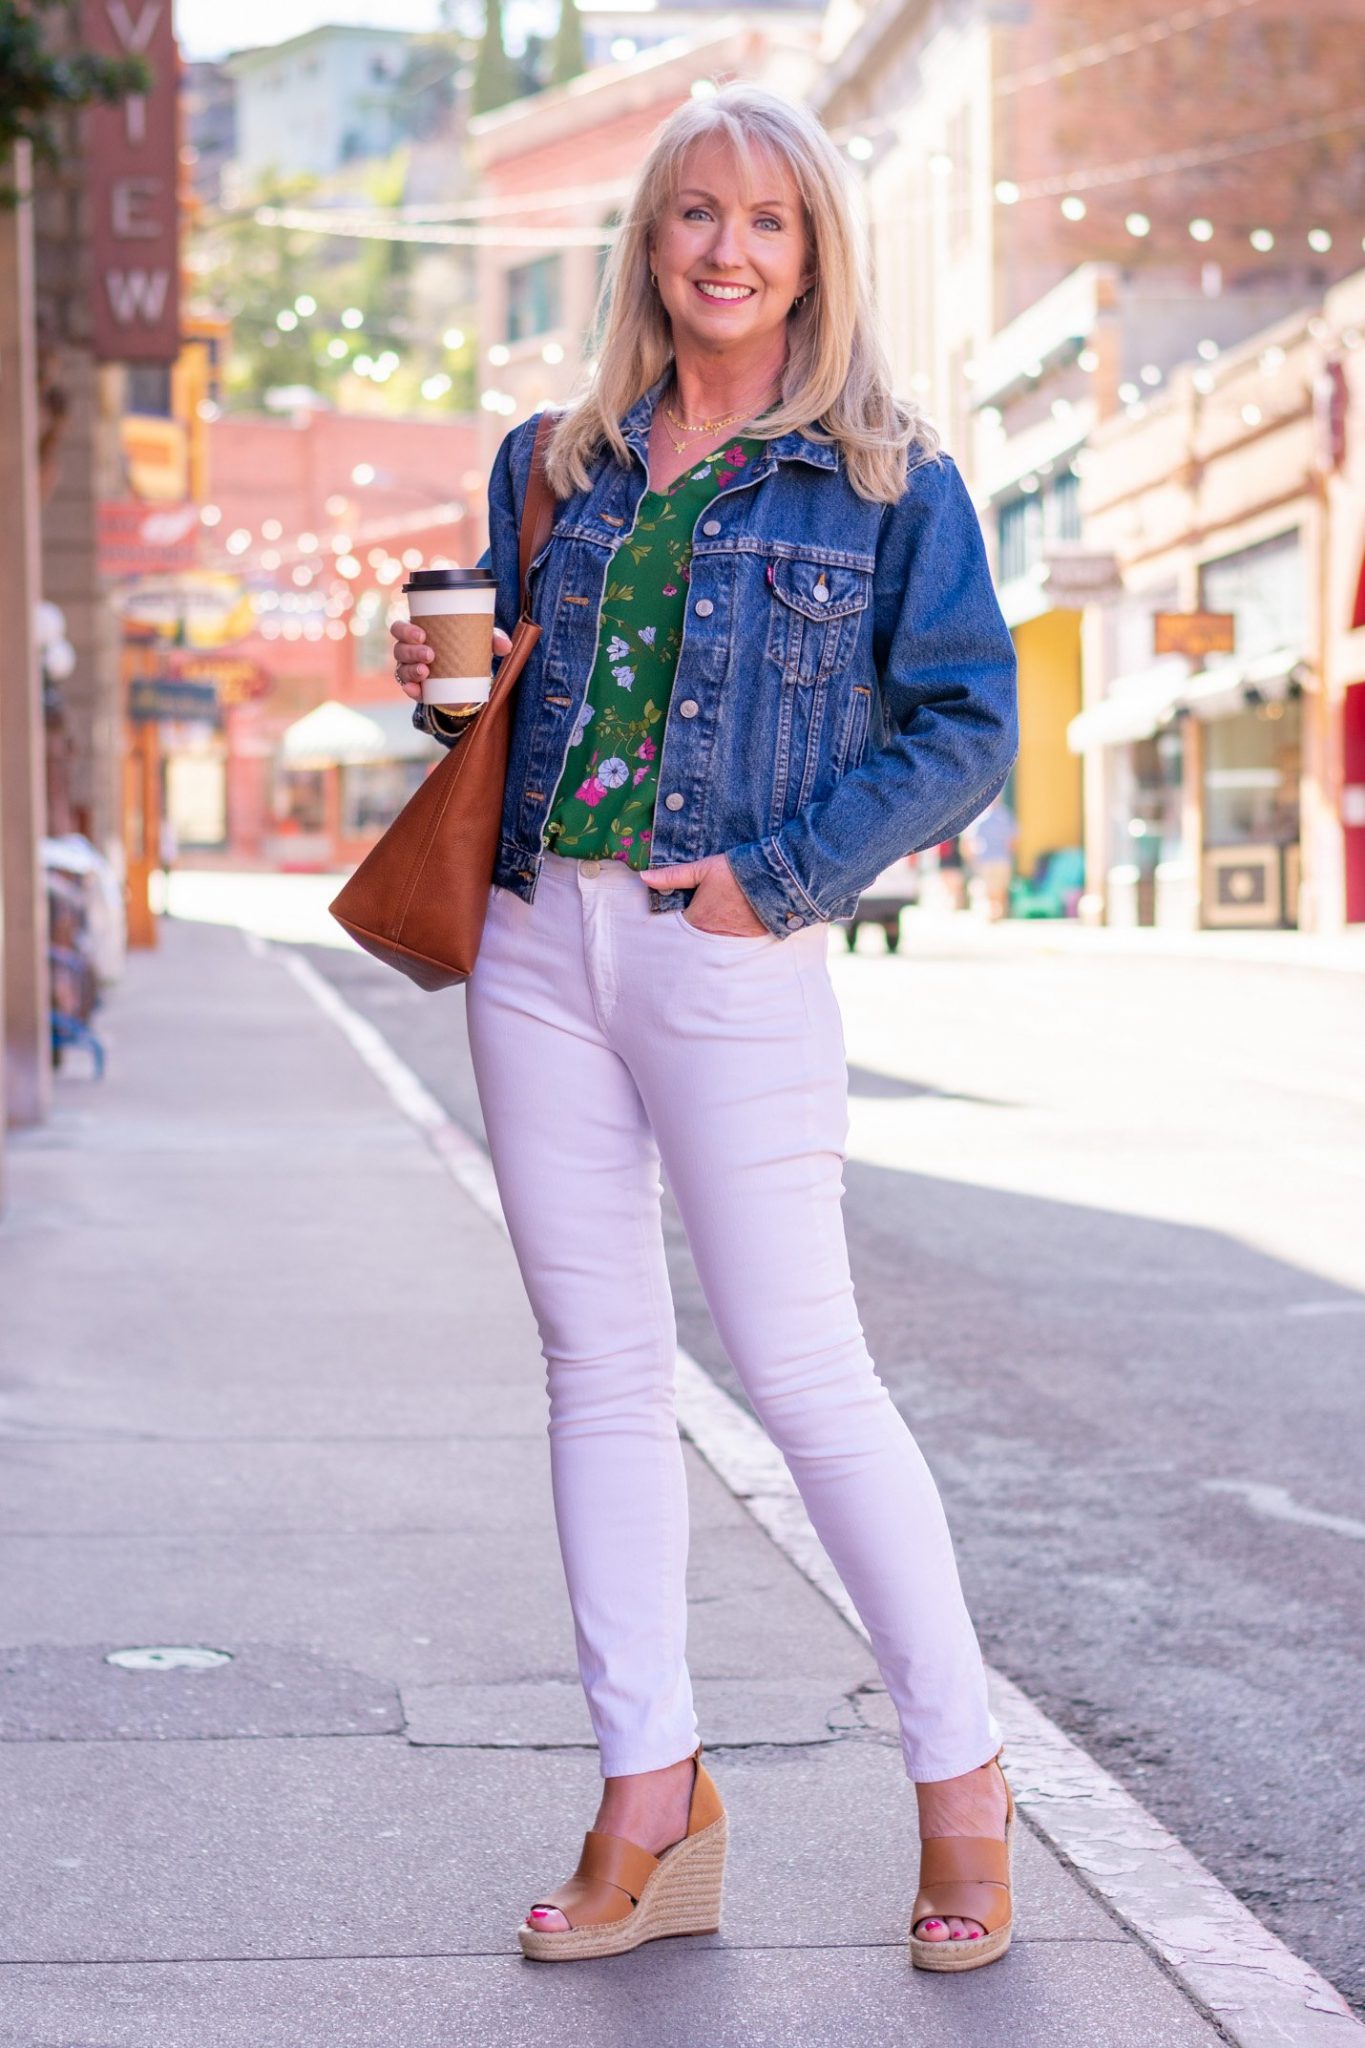 Spring Floral Top with White Jeans - Dressed for My Day